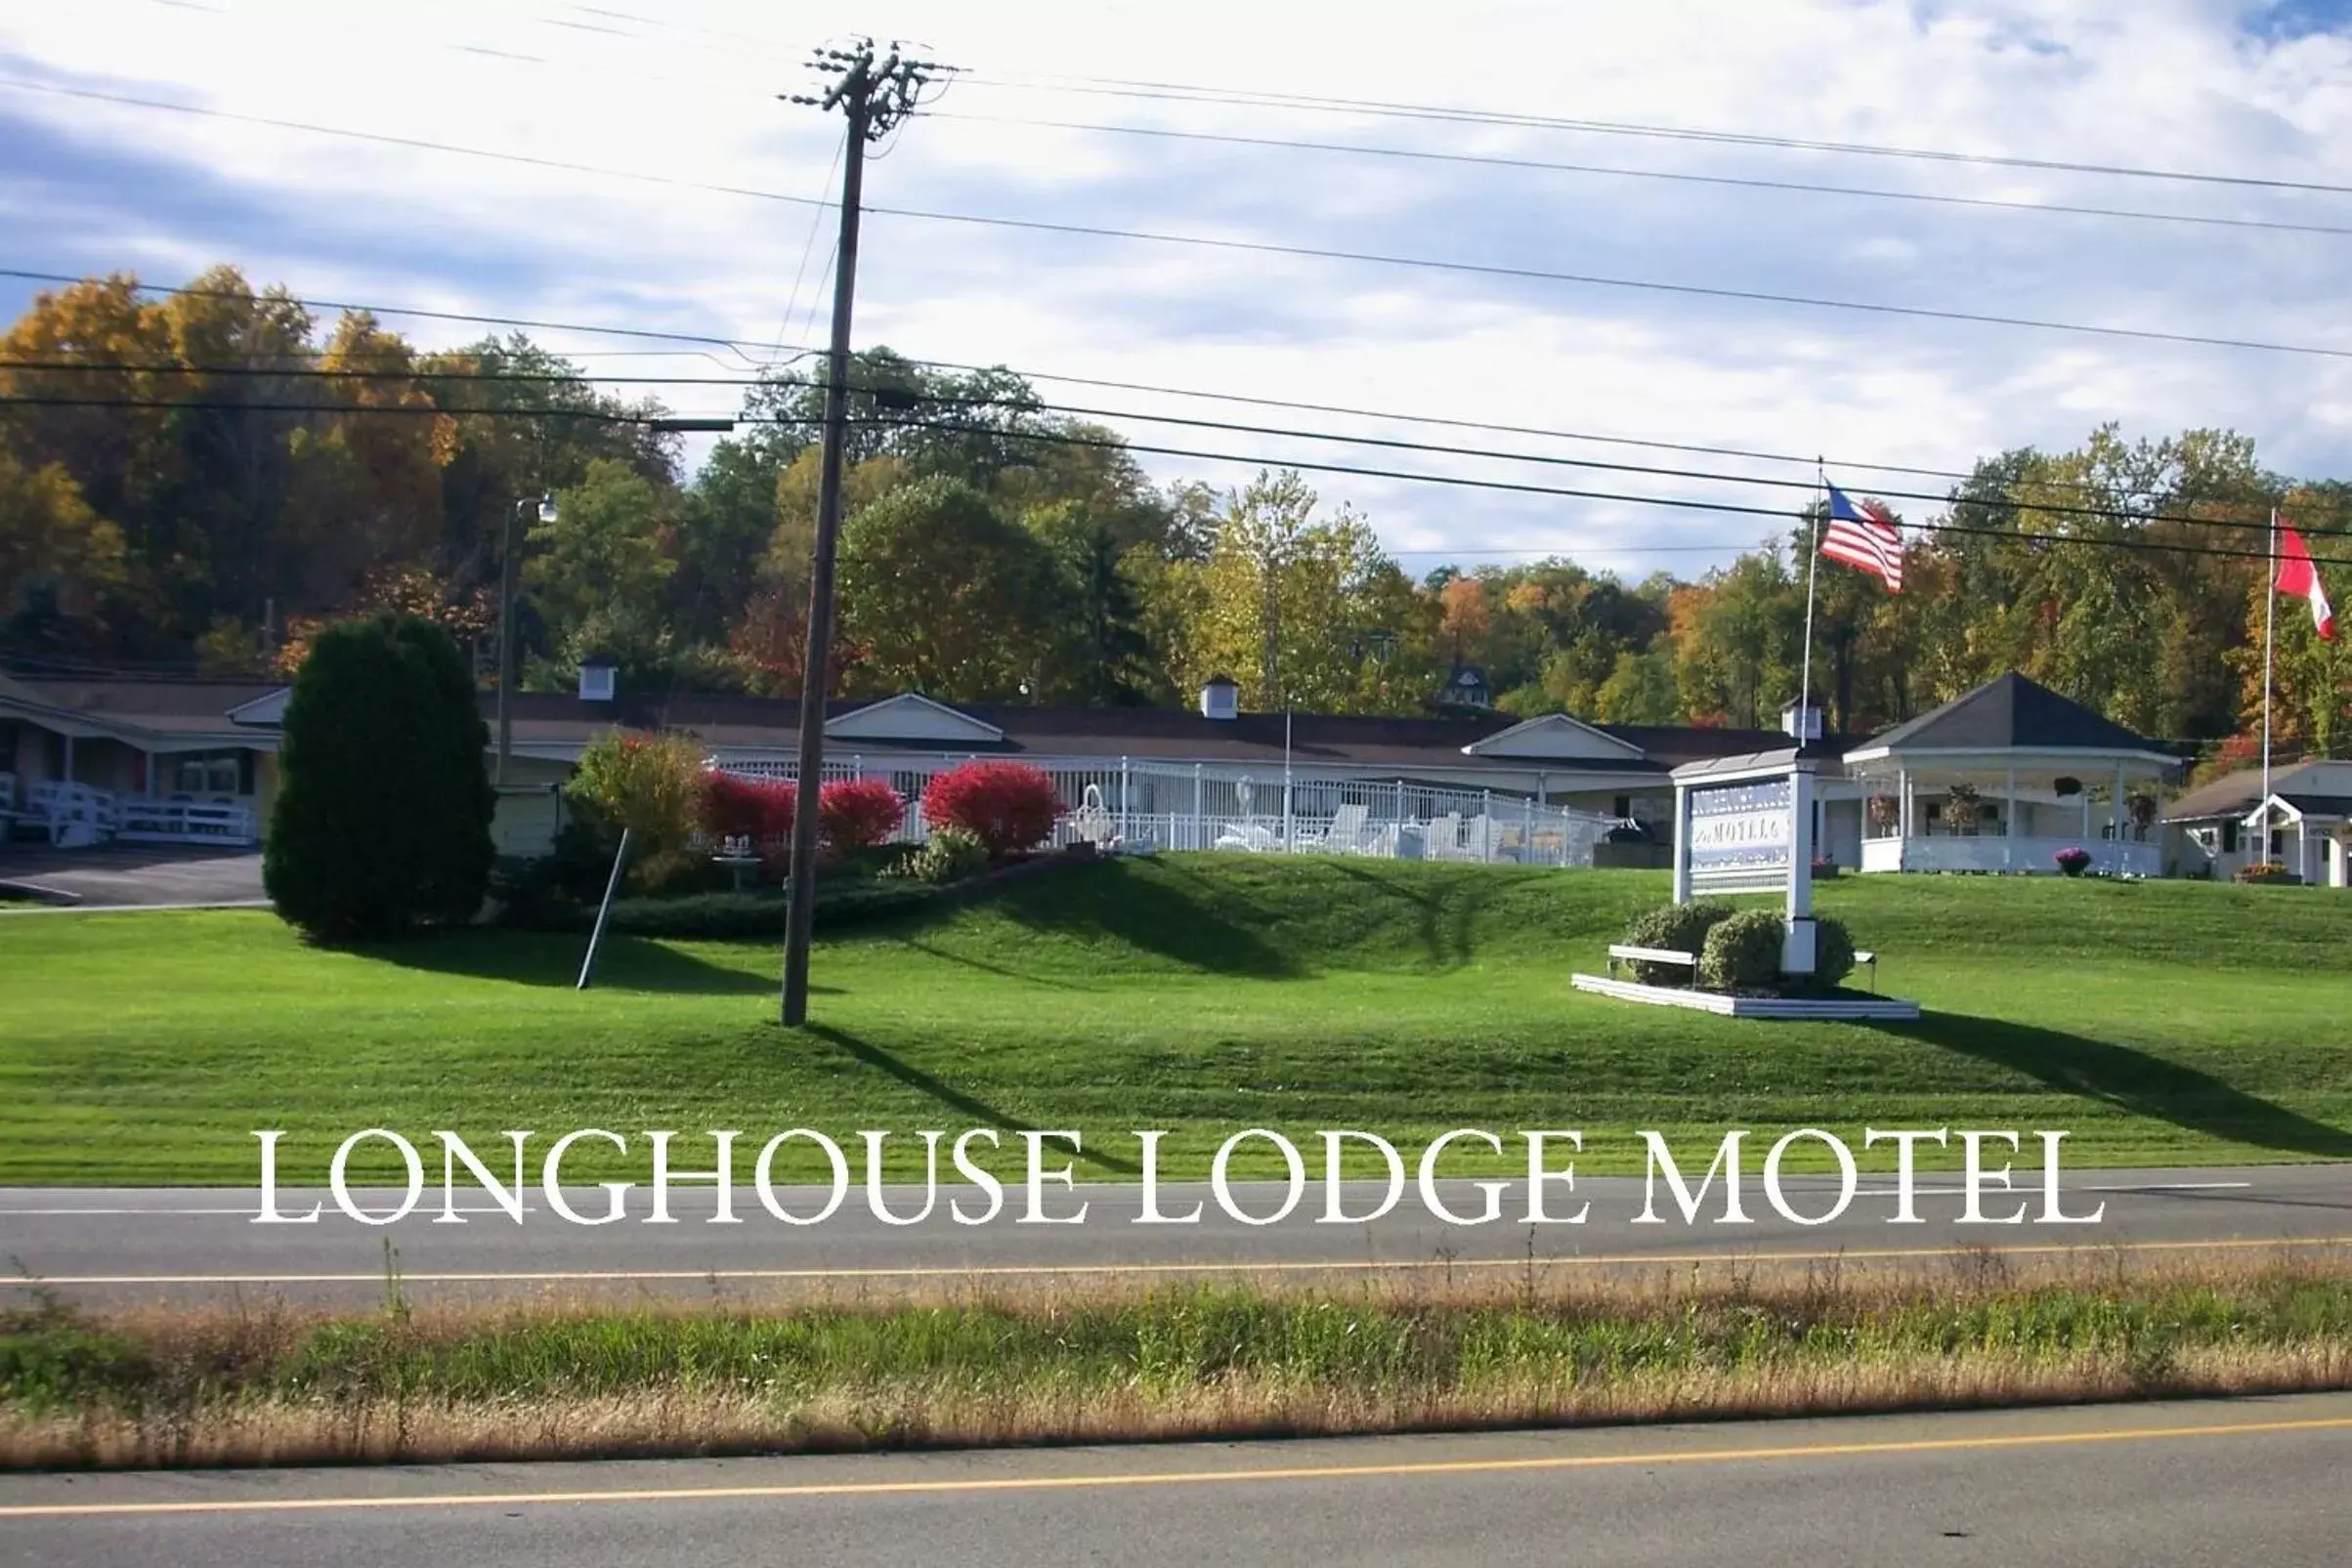 Property building in Longhouse Lodge Motel